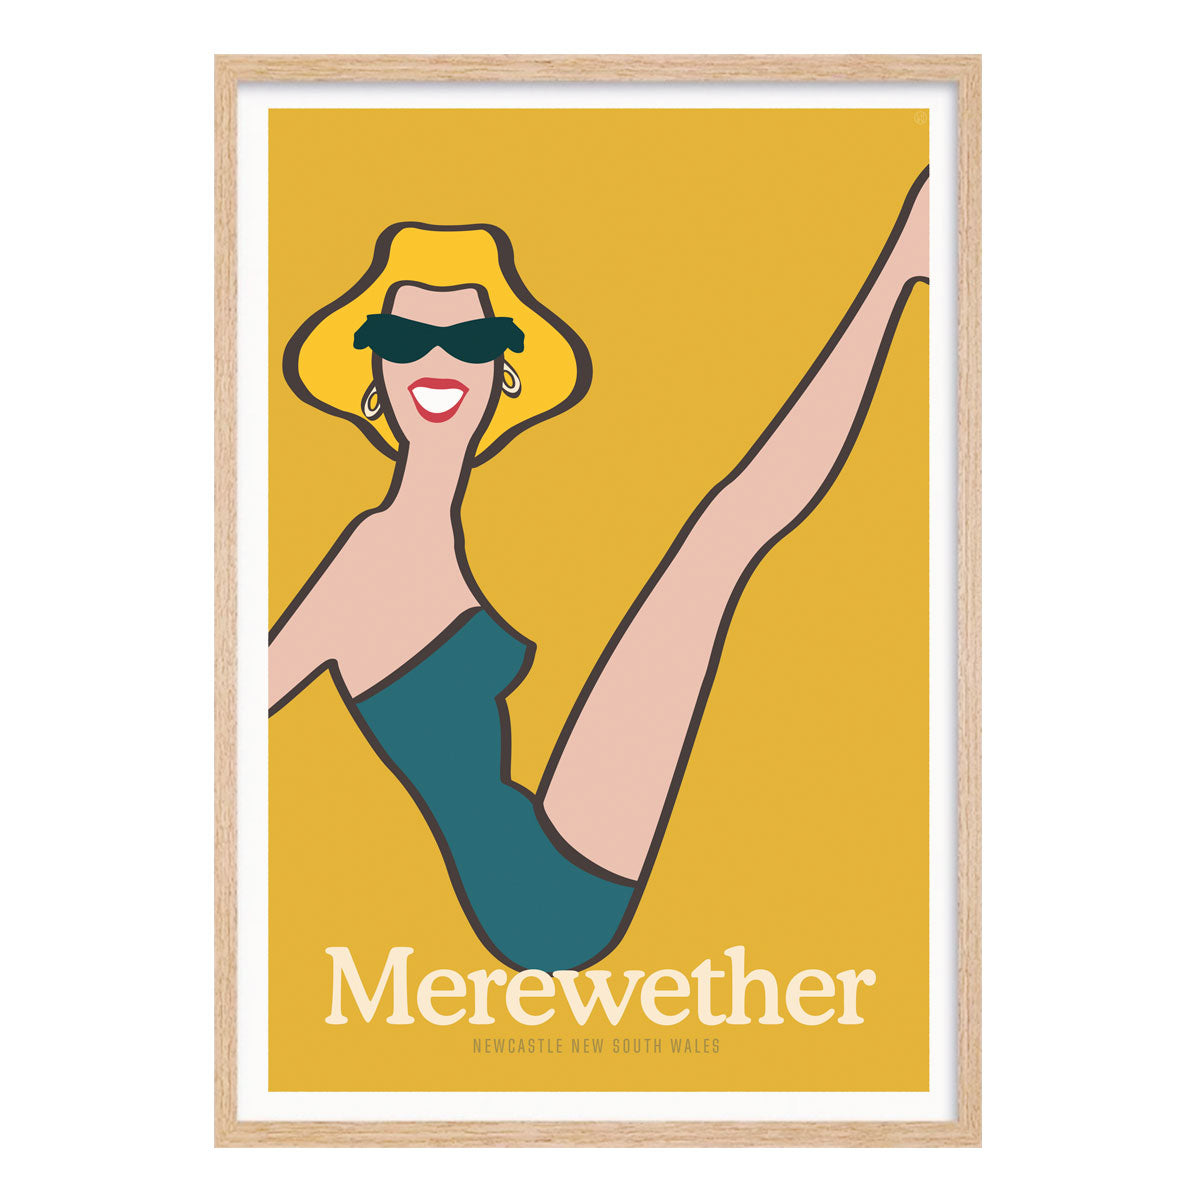 Merewether Beach Gal retro vintage poster print in oak frame from Places We Luv